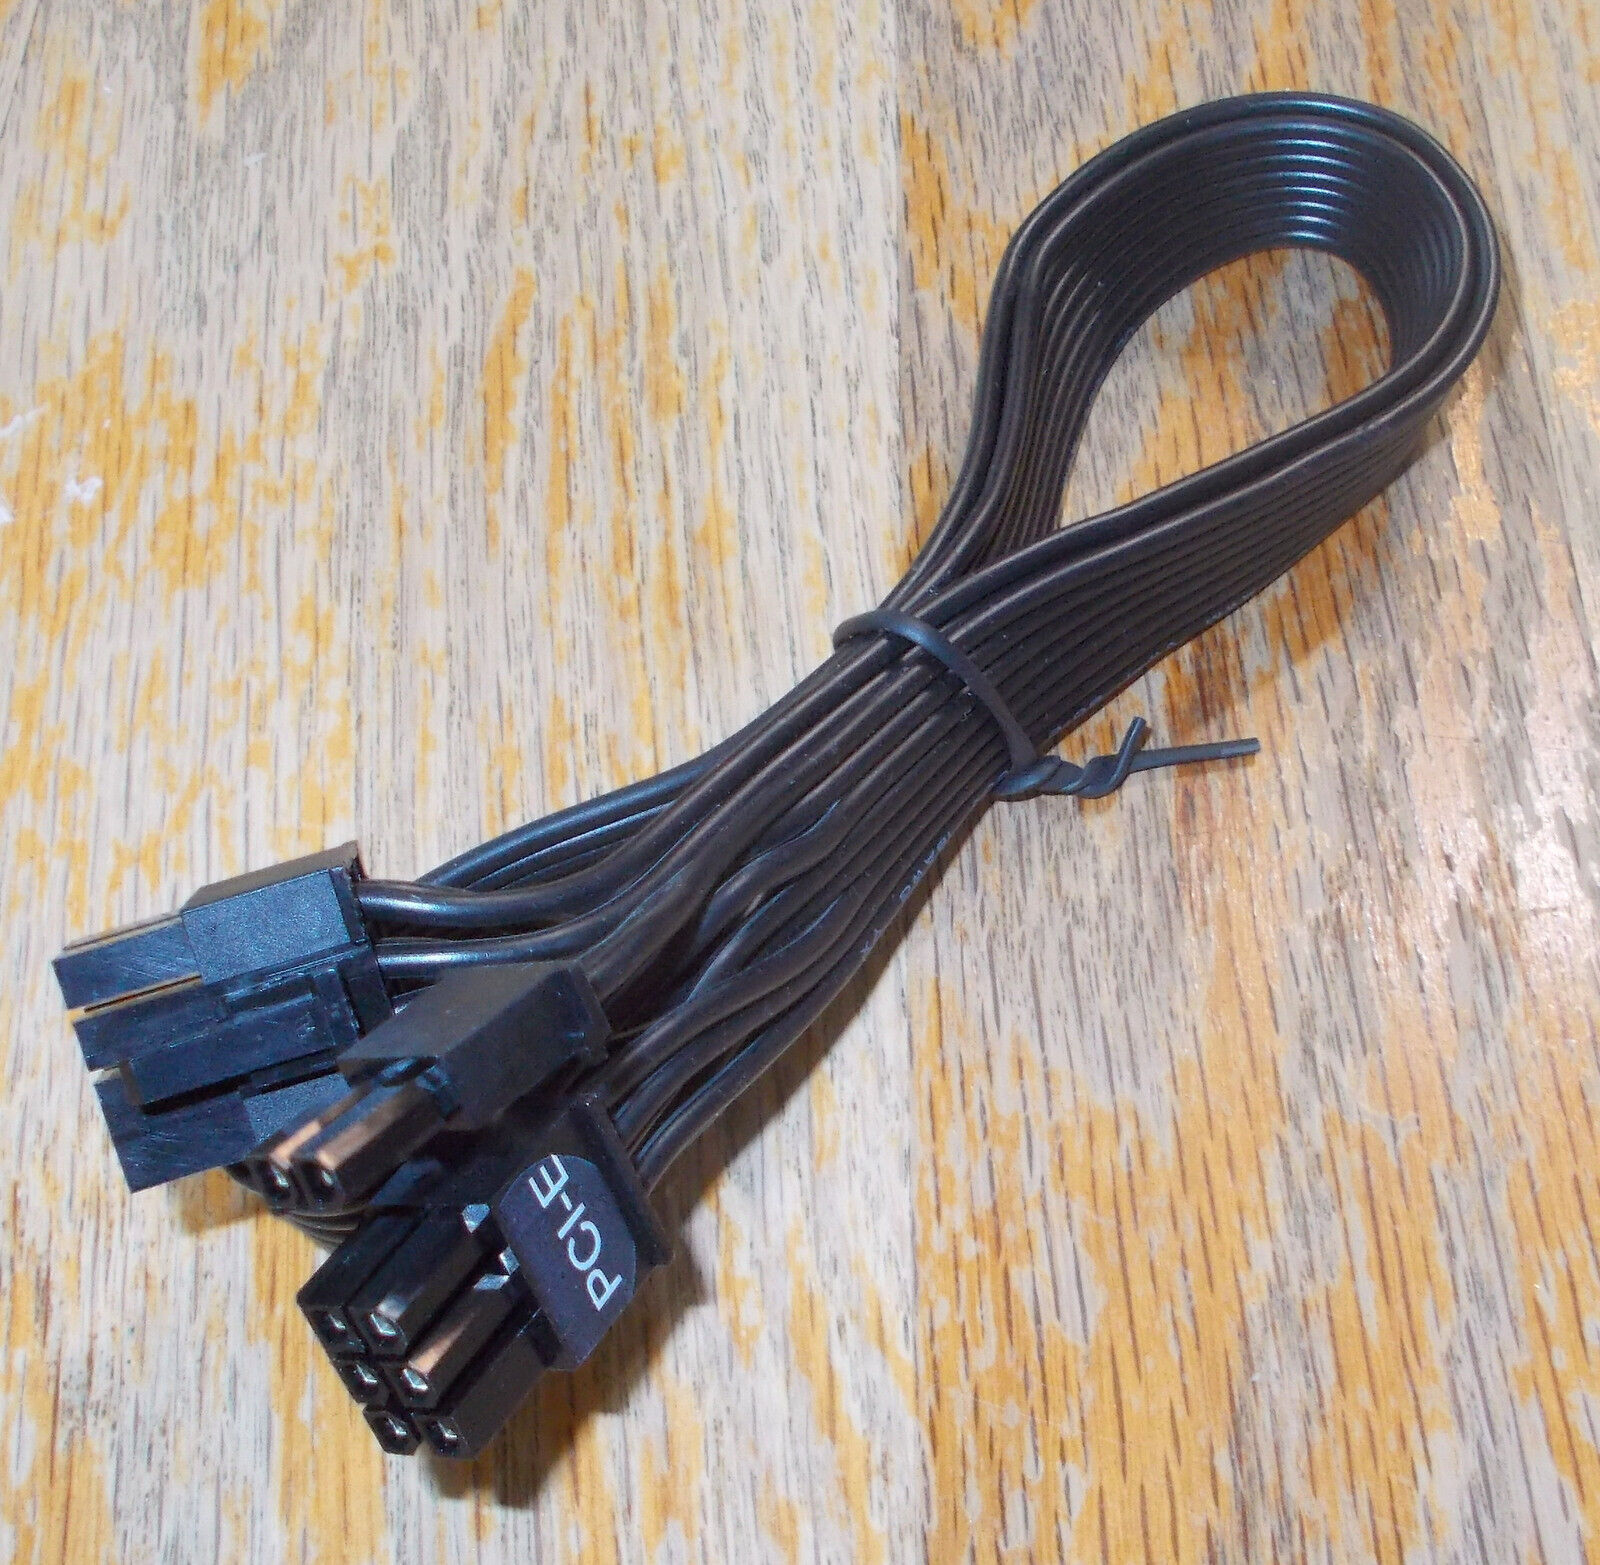 VGA PCIe Graphics End Plug Modular Power Cable for Rosewill Capstone 850M Power